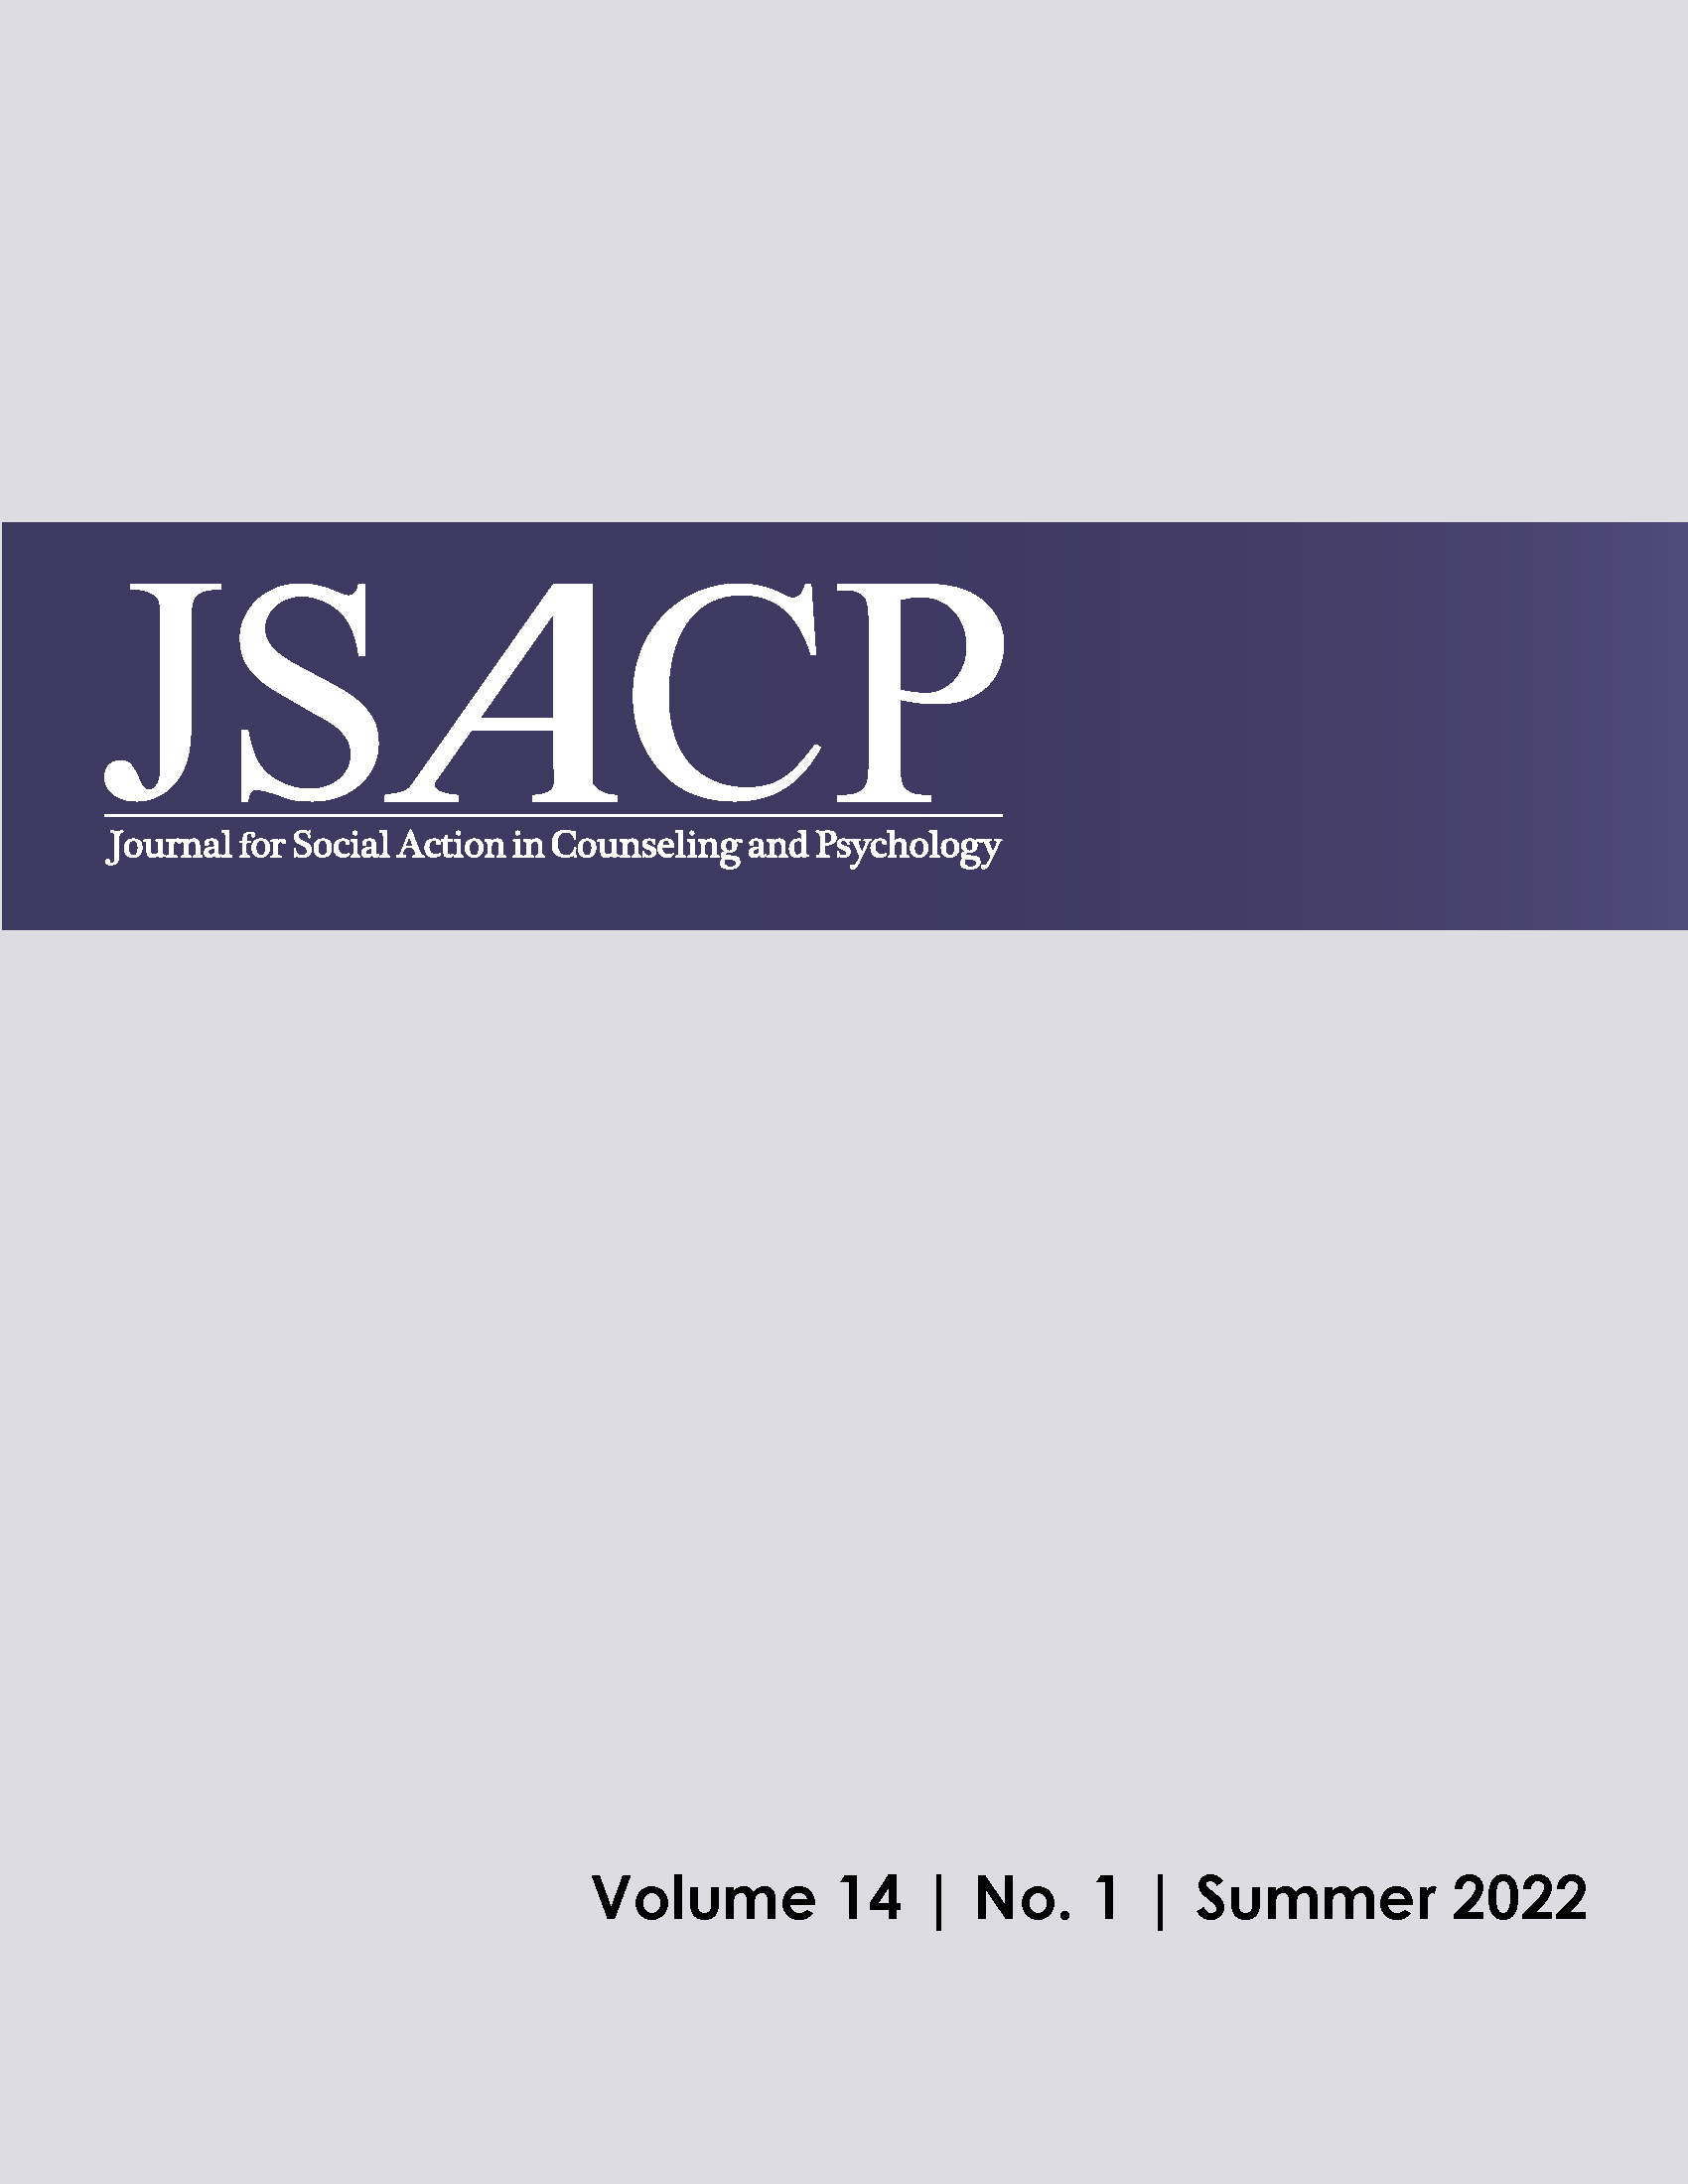 					View Vol. 14 No. 1 (2022): Journal for Social Action in Counseling and Psychology - Special Issue: Curriculum & Training pt. 1, Summer 2022
				